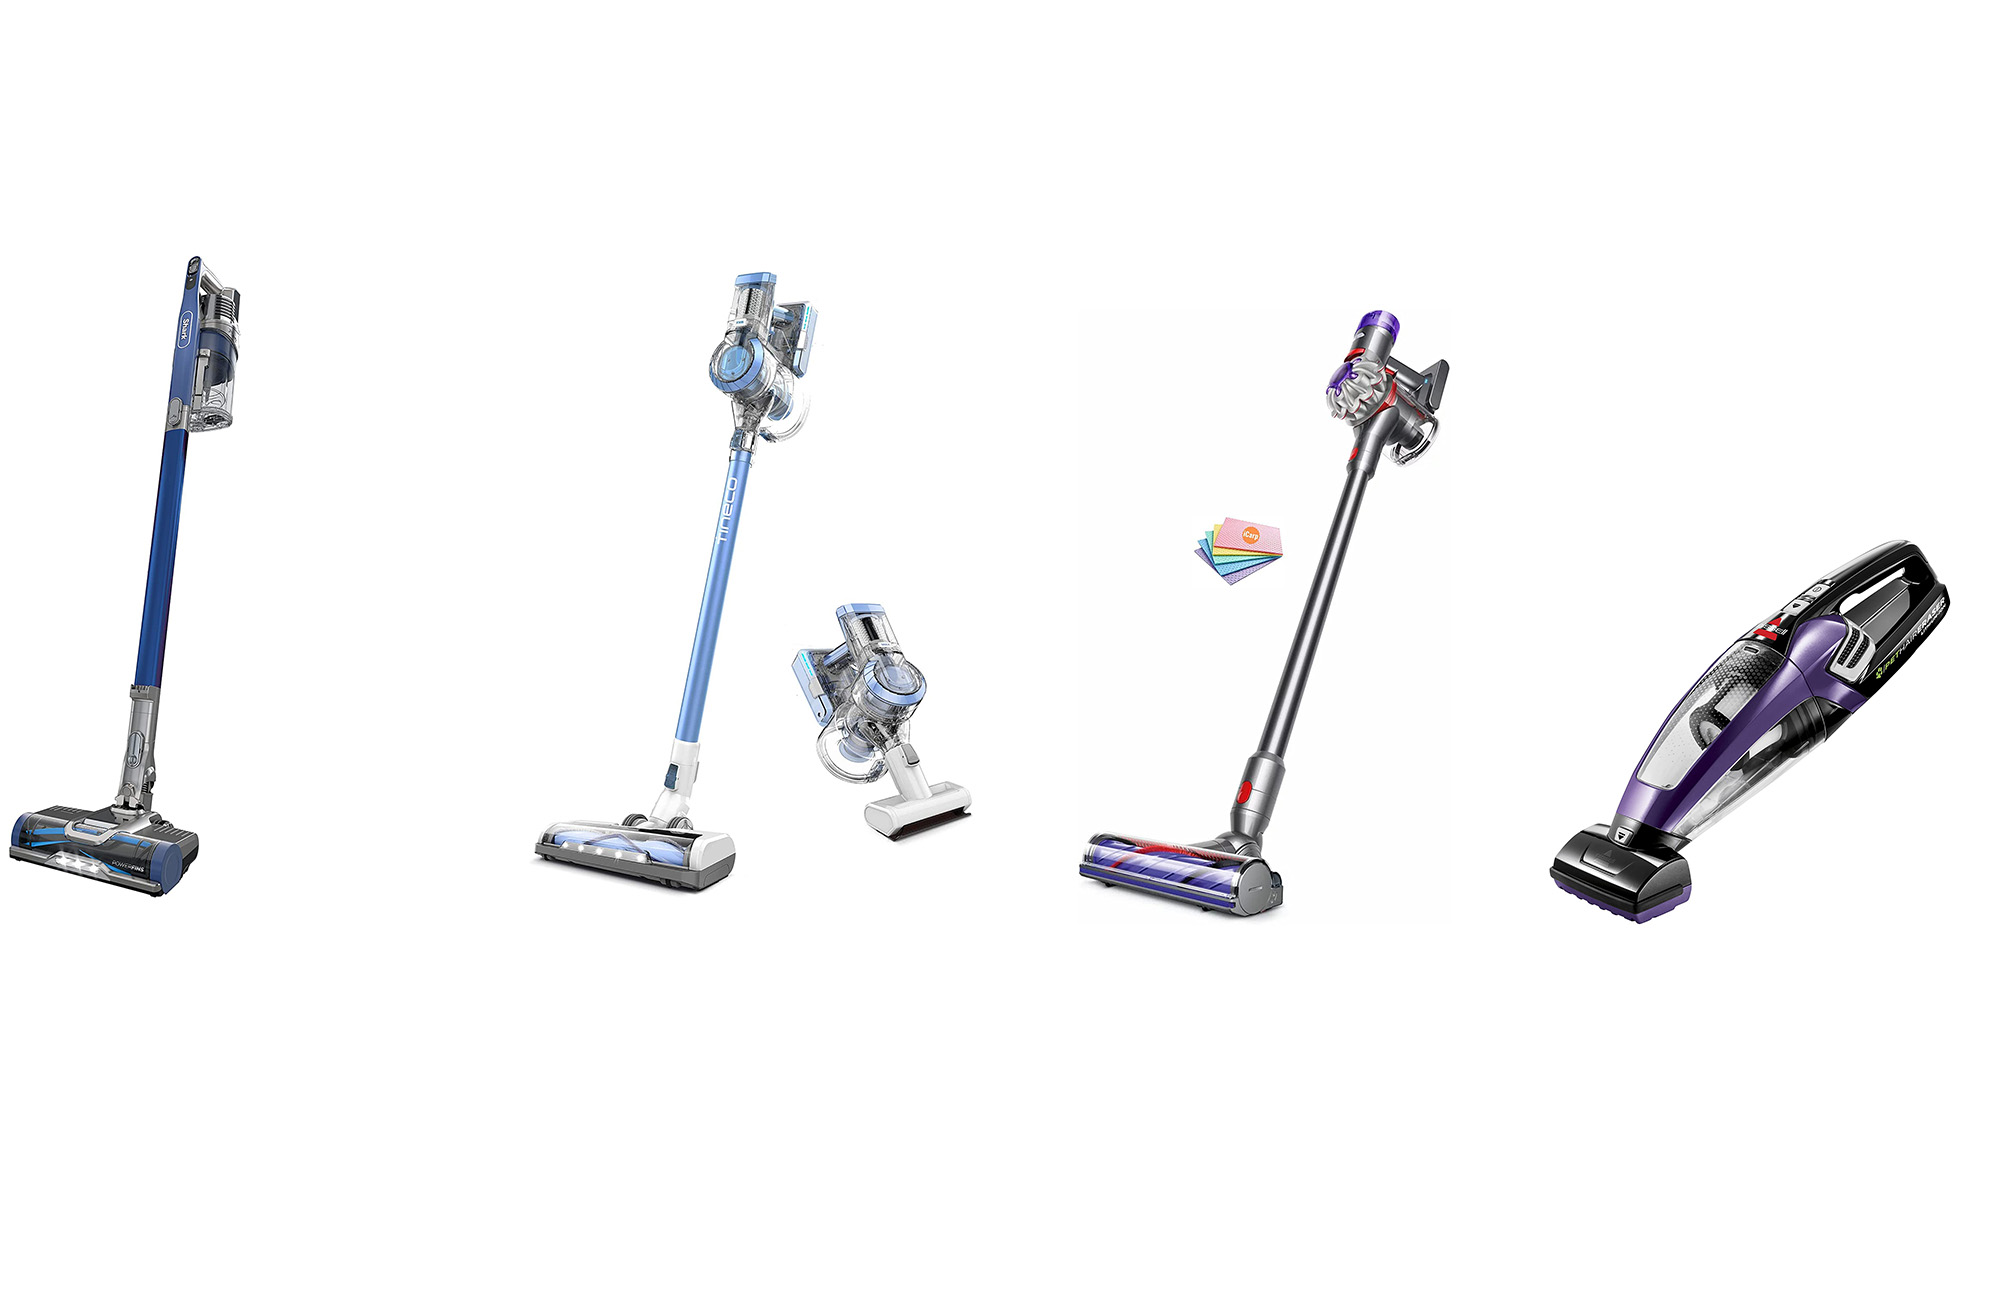 The 7 best cordless stick vacuums from Shark and Dyson - ABC7 Chicago